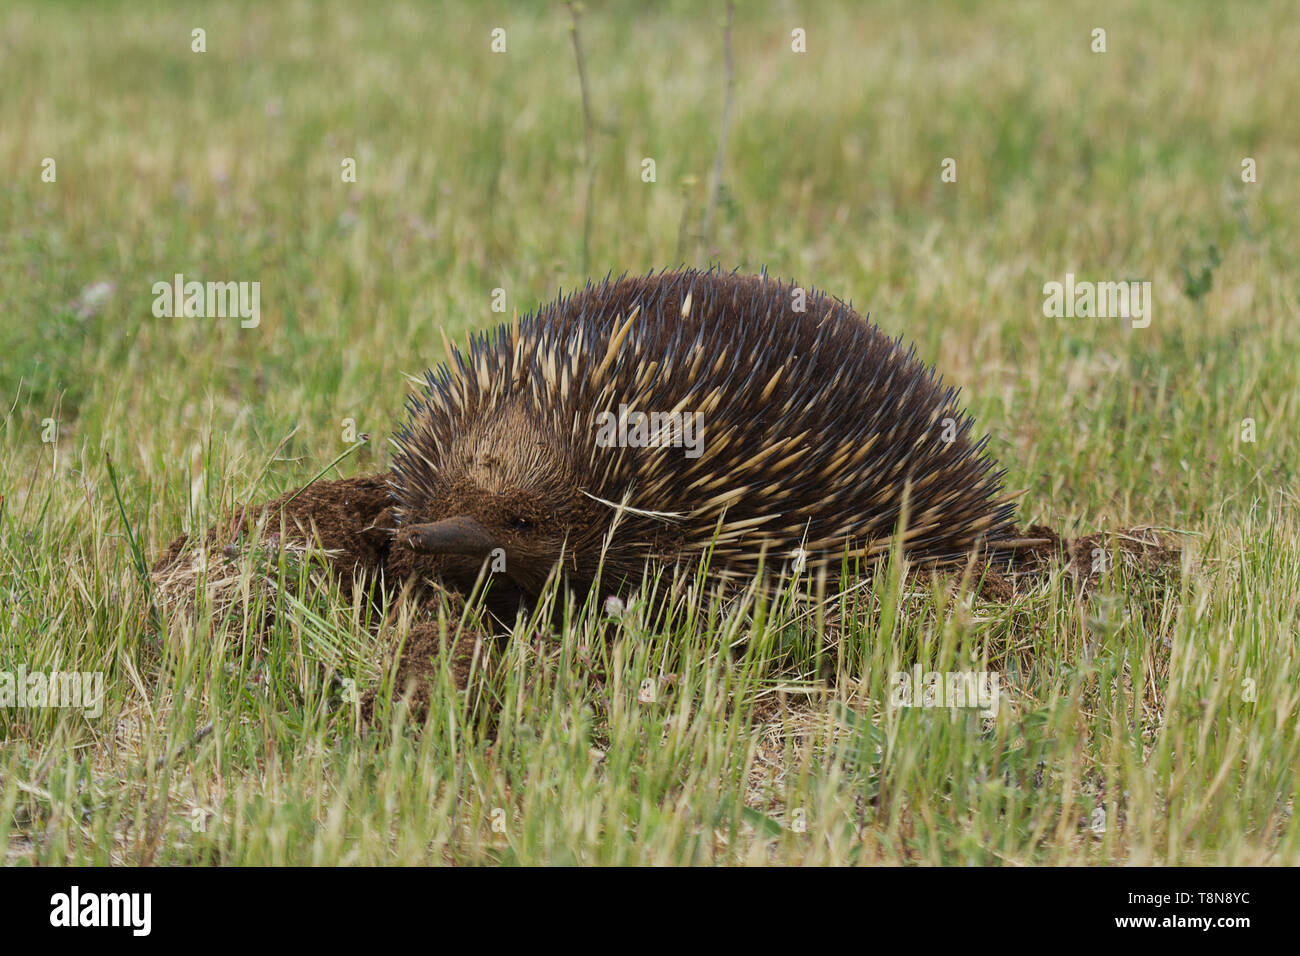 Short-Beaked Echidna digging for ants on a garden lawn Stock Photo